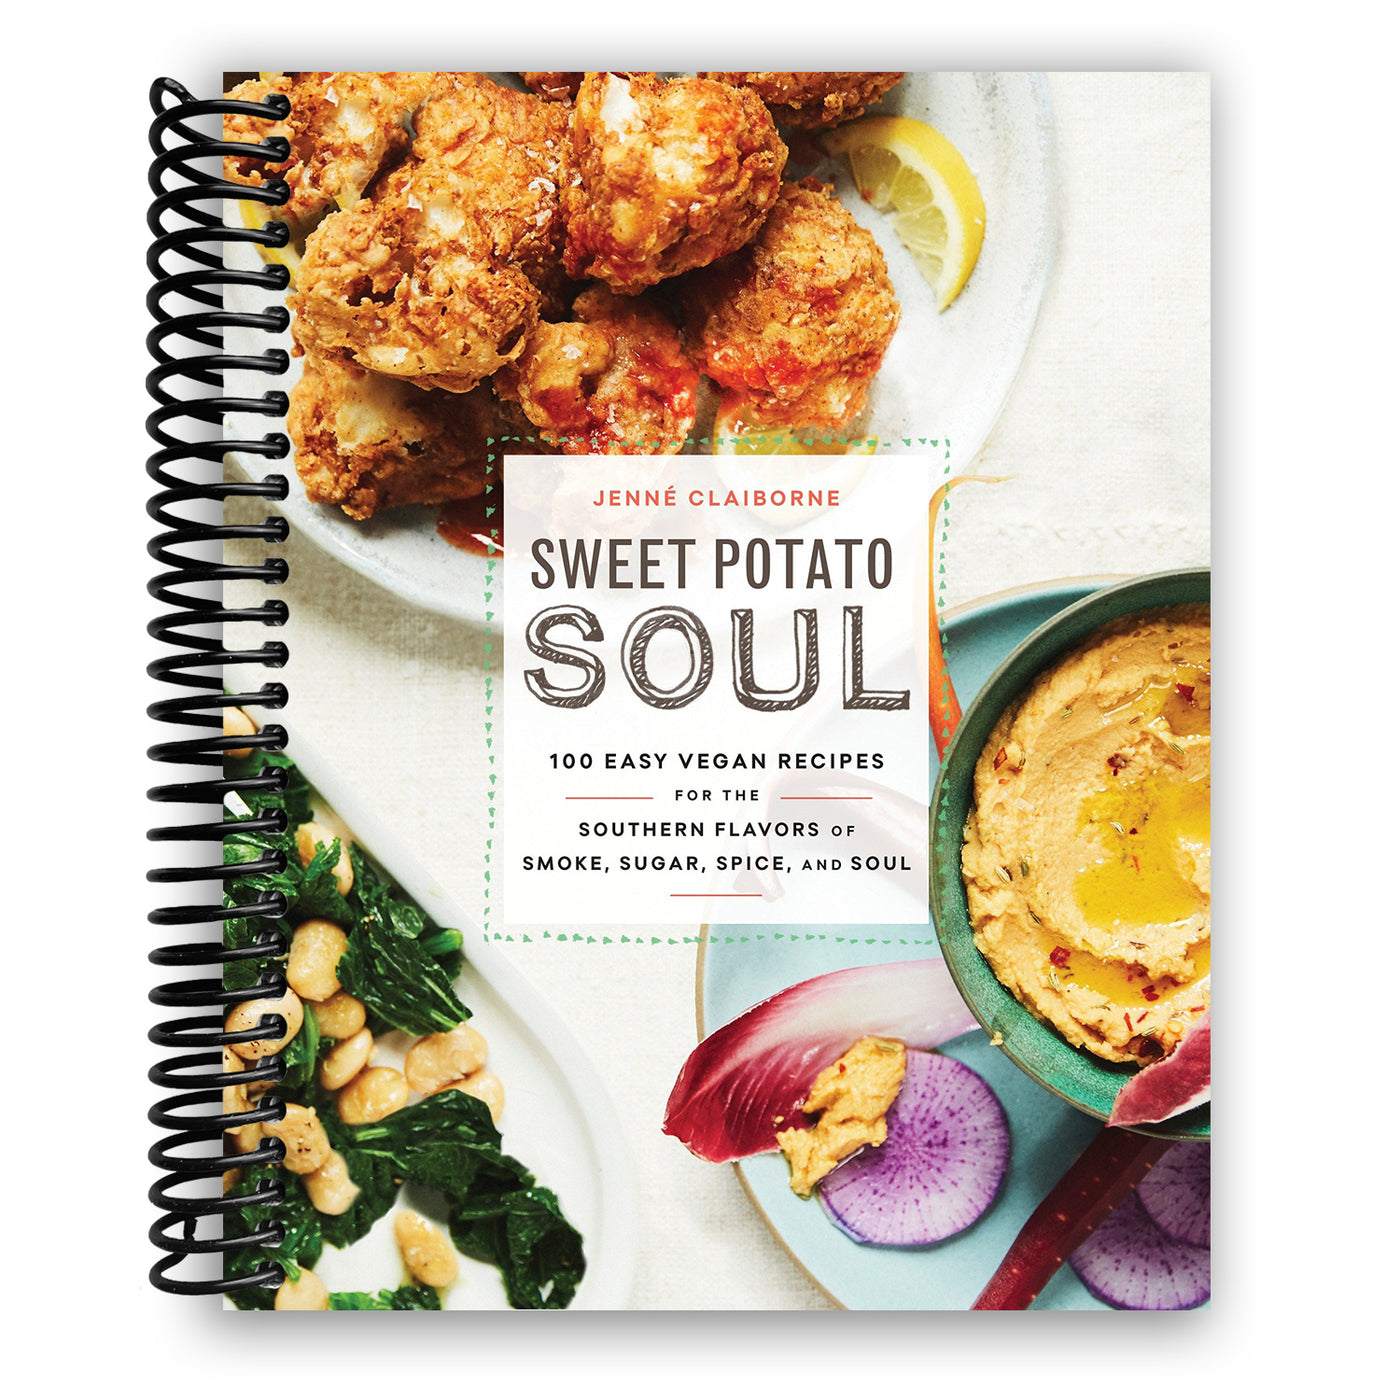 Sweet Potato Soul: 100 Easy Vegan Recipes for the Southern Flavors of Smoke, Sugar, Spice, and Soul (Spiral Bound)